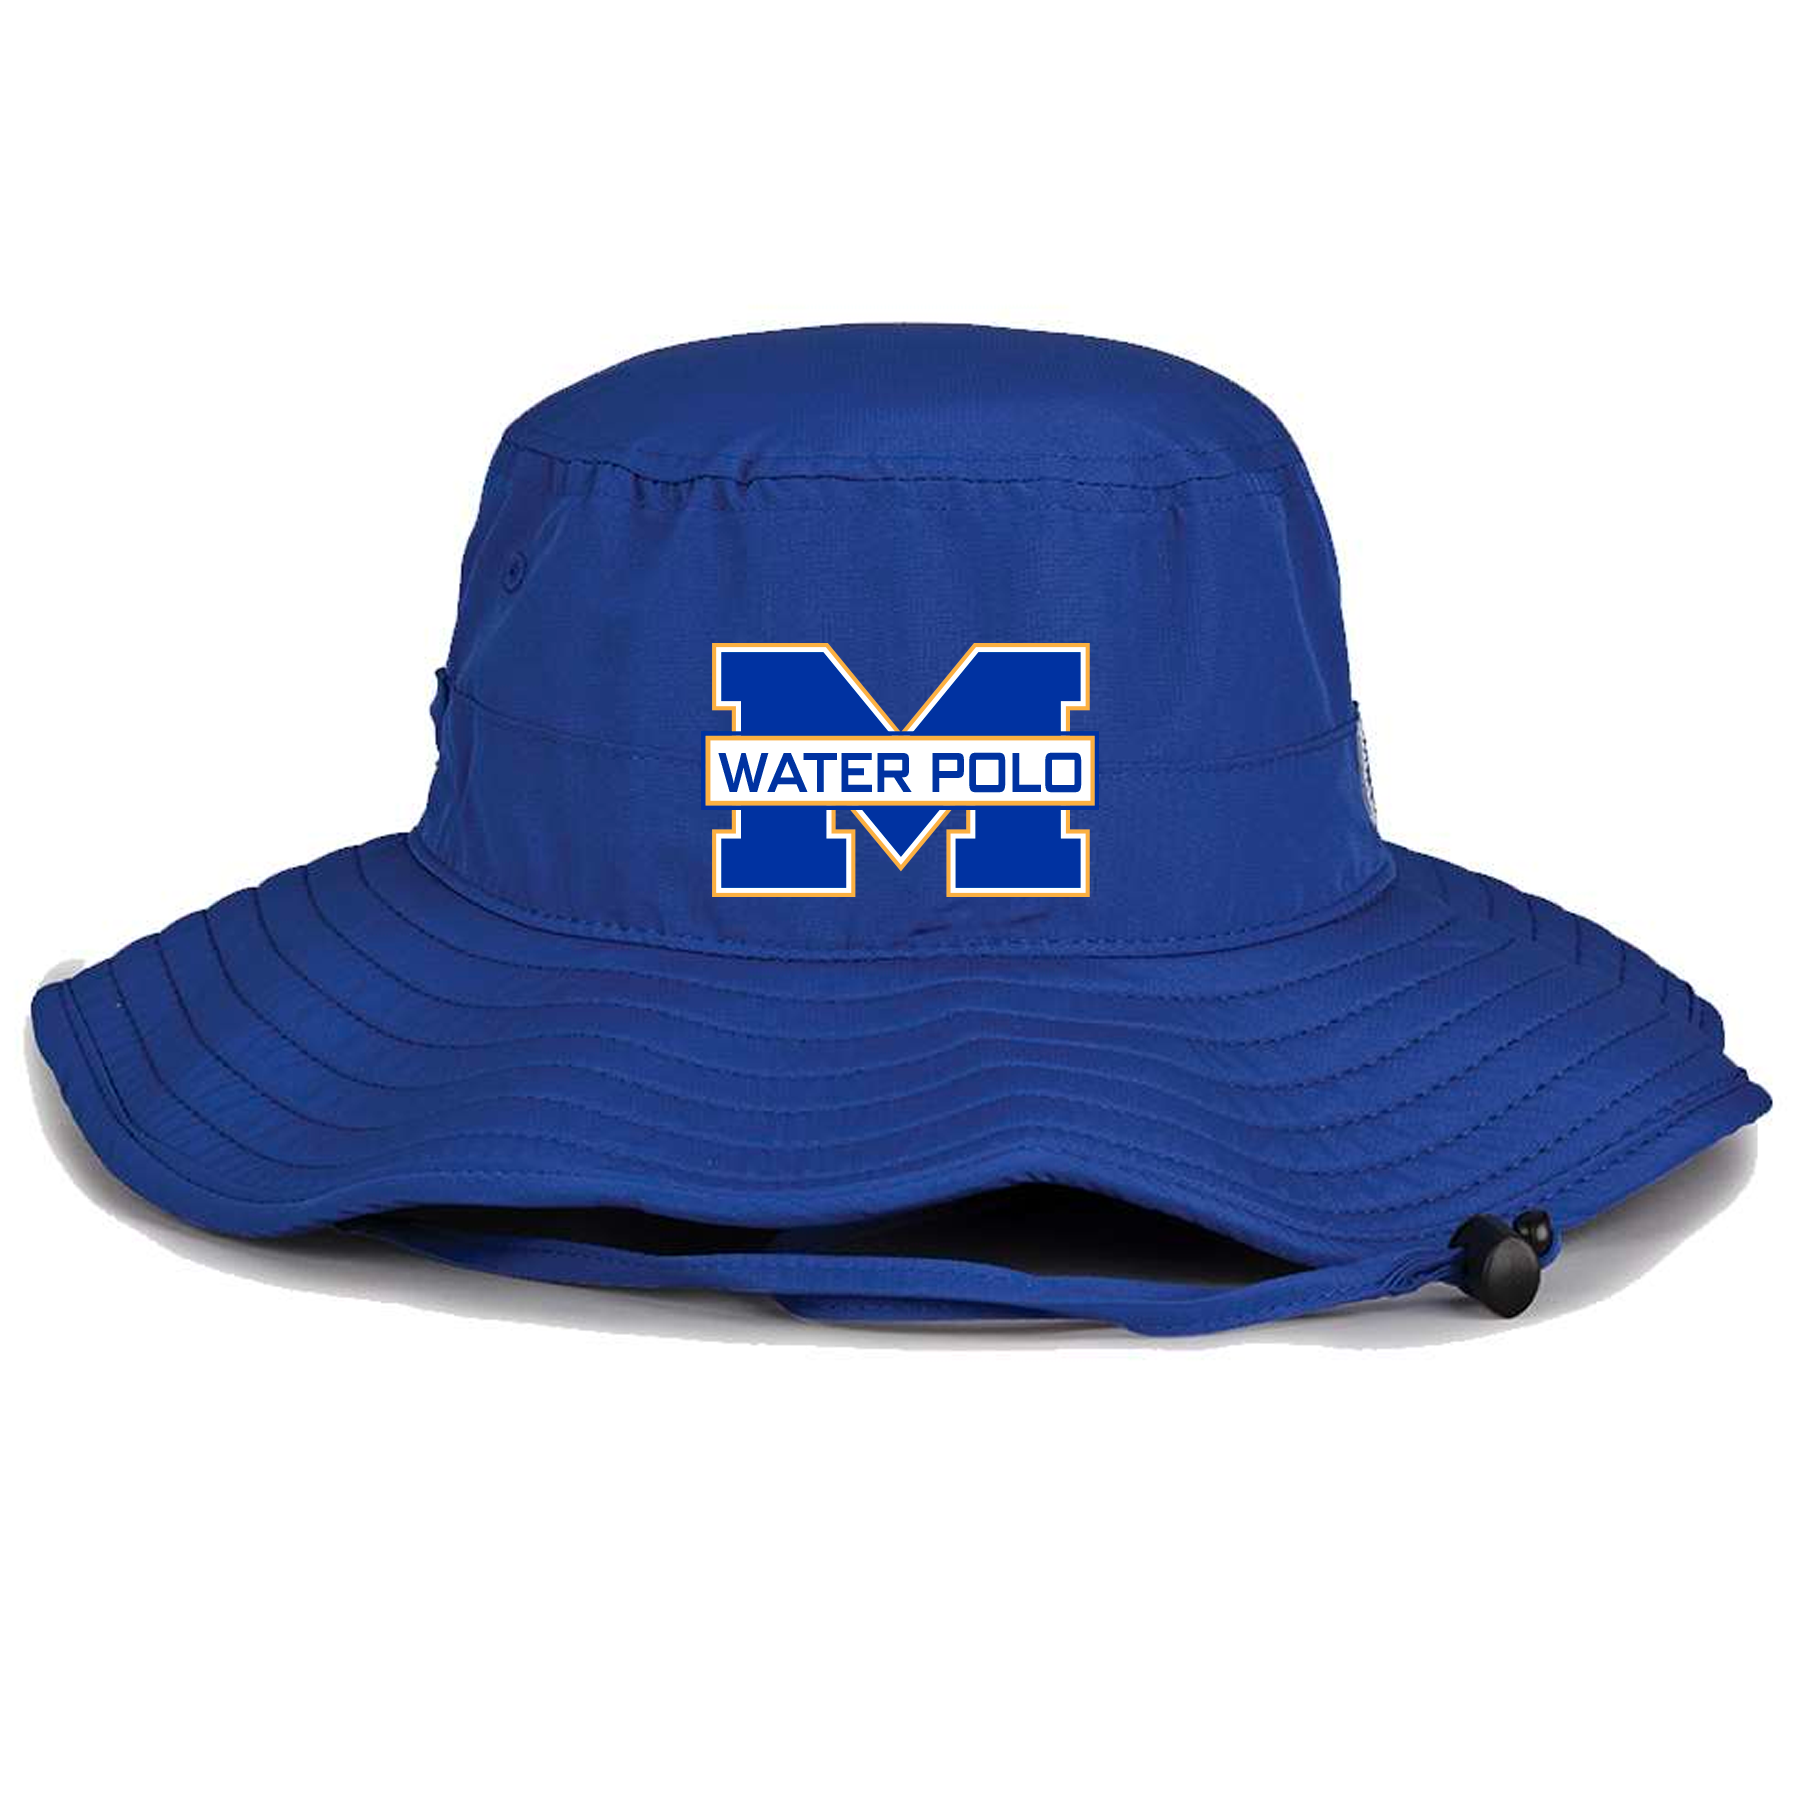 MIRA MESA WATER POLO - EMBROIDERED BOONEY HAT